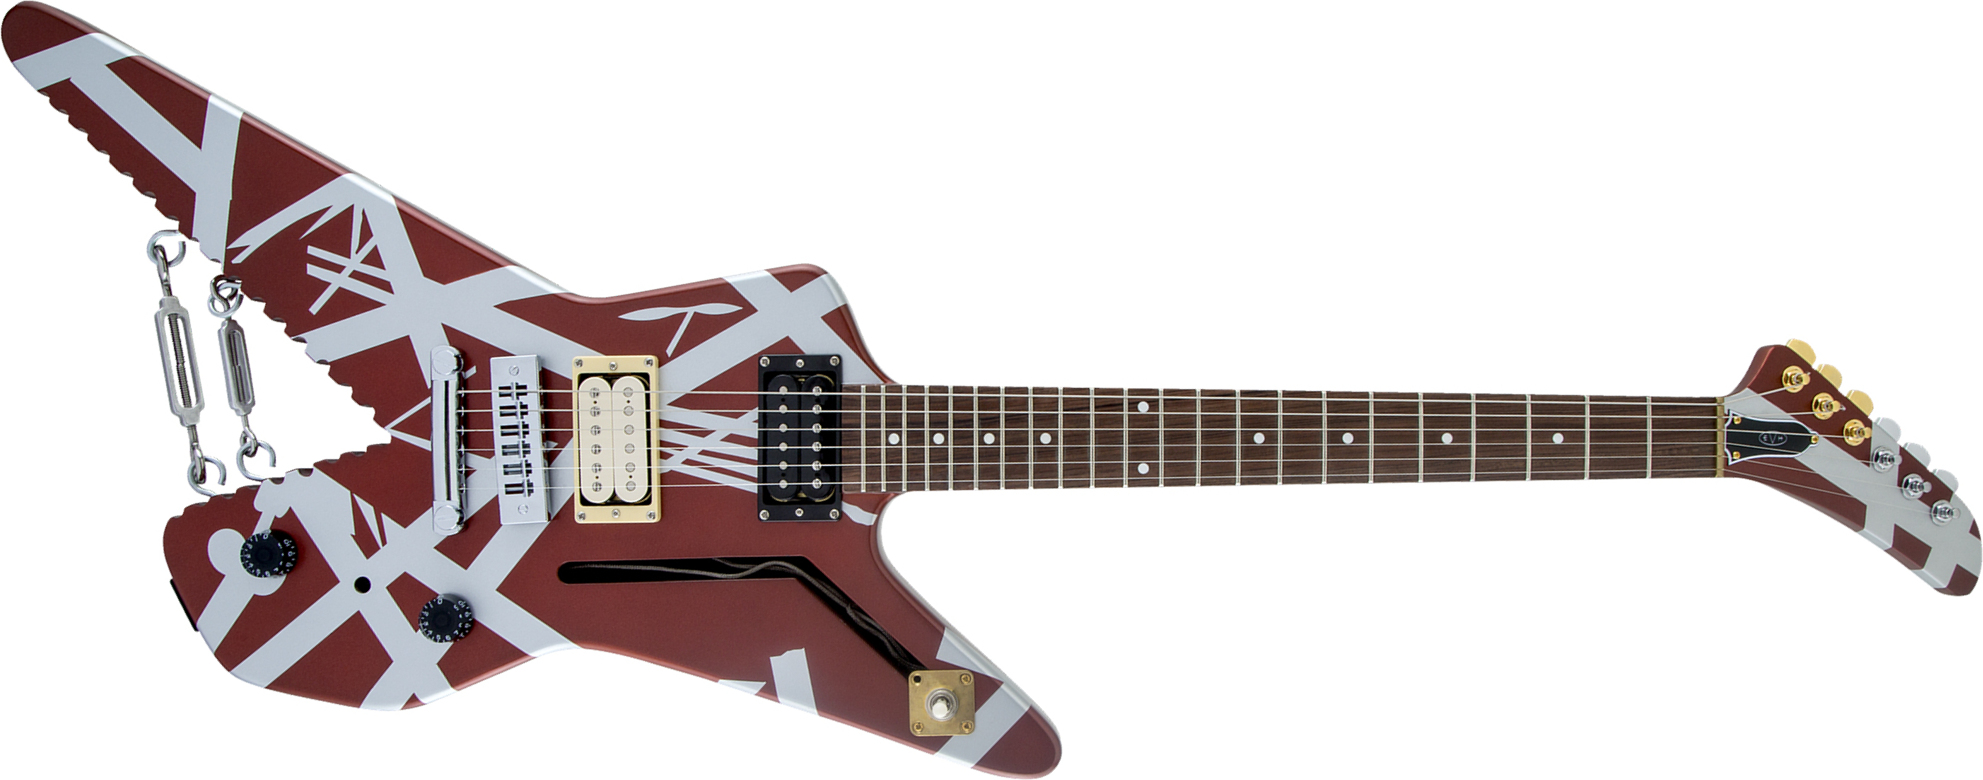 Evh Striped Series Shark Hh Ht Pf - Burgundy With Silver Stripes - Metal electric guitar - Main picture